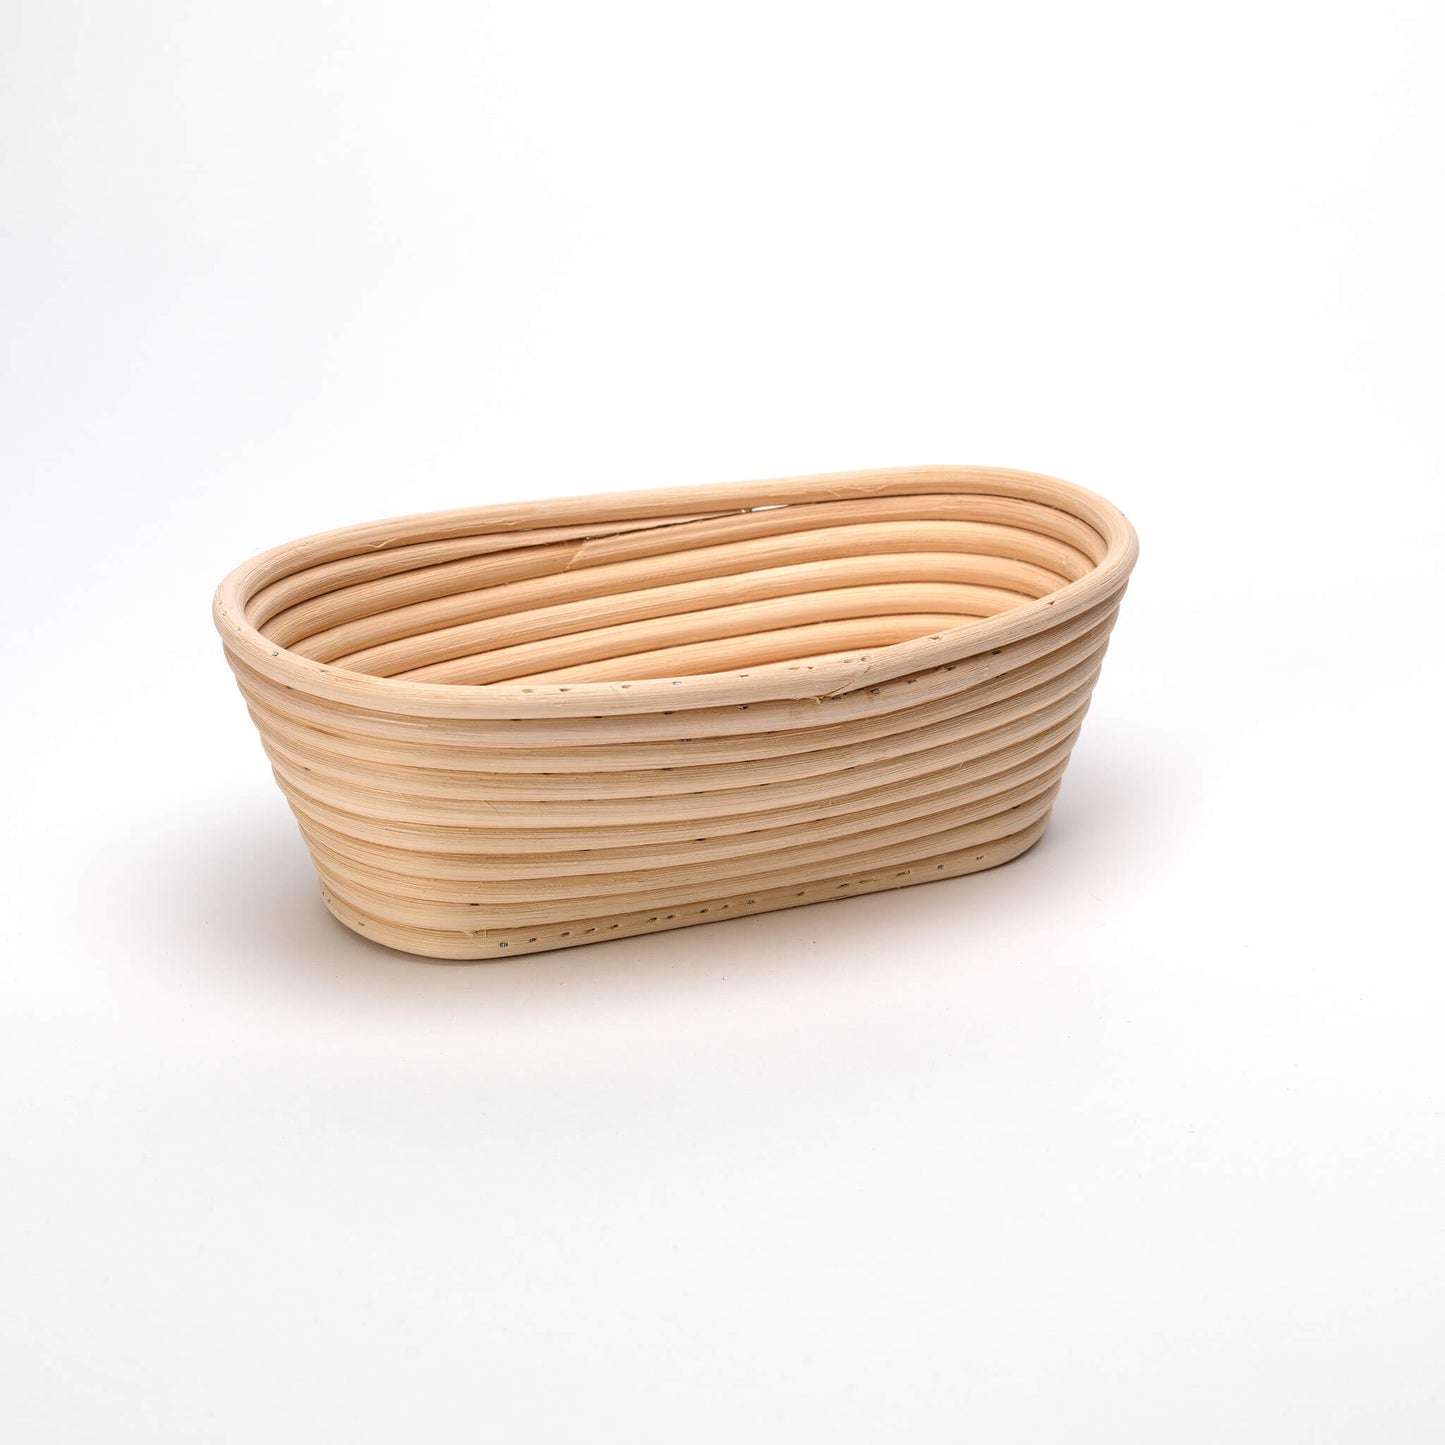 Oval 25cm Long Rattan Cane Banneton with Liner  Bread Dough Proving Proofing Basket Brotform